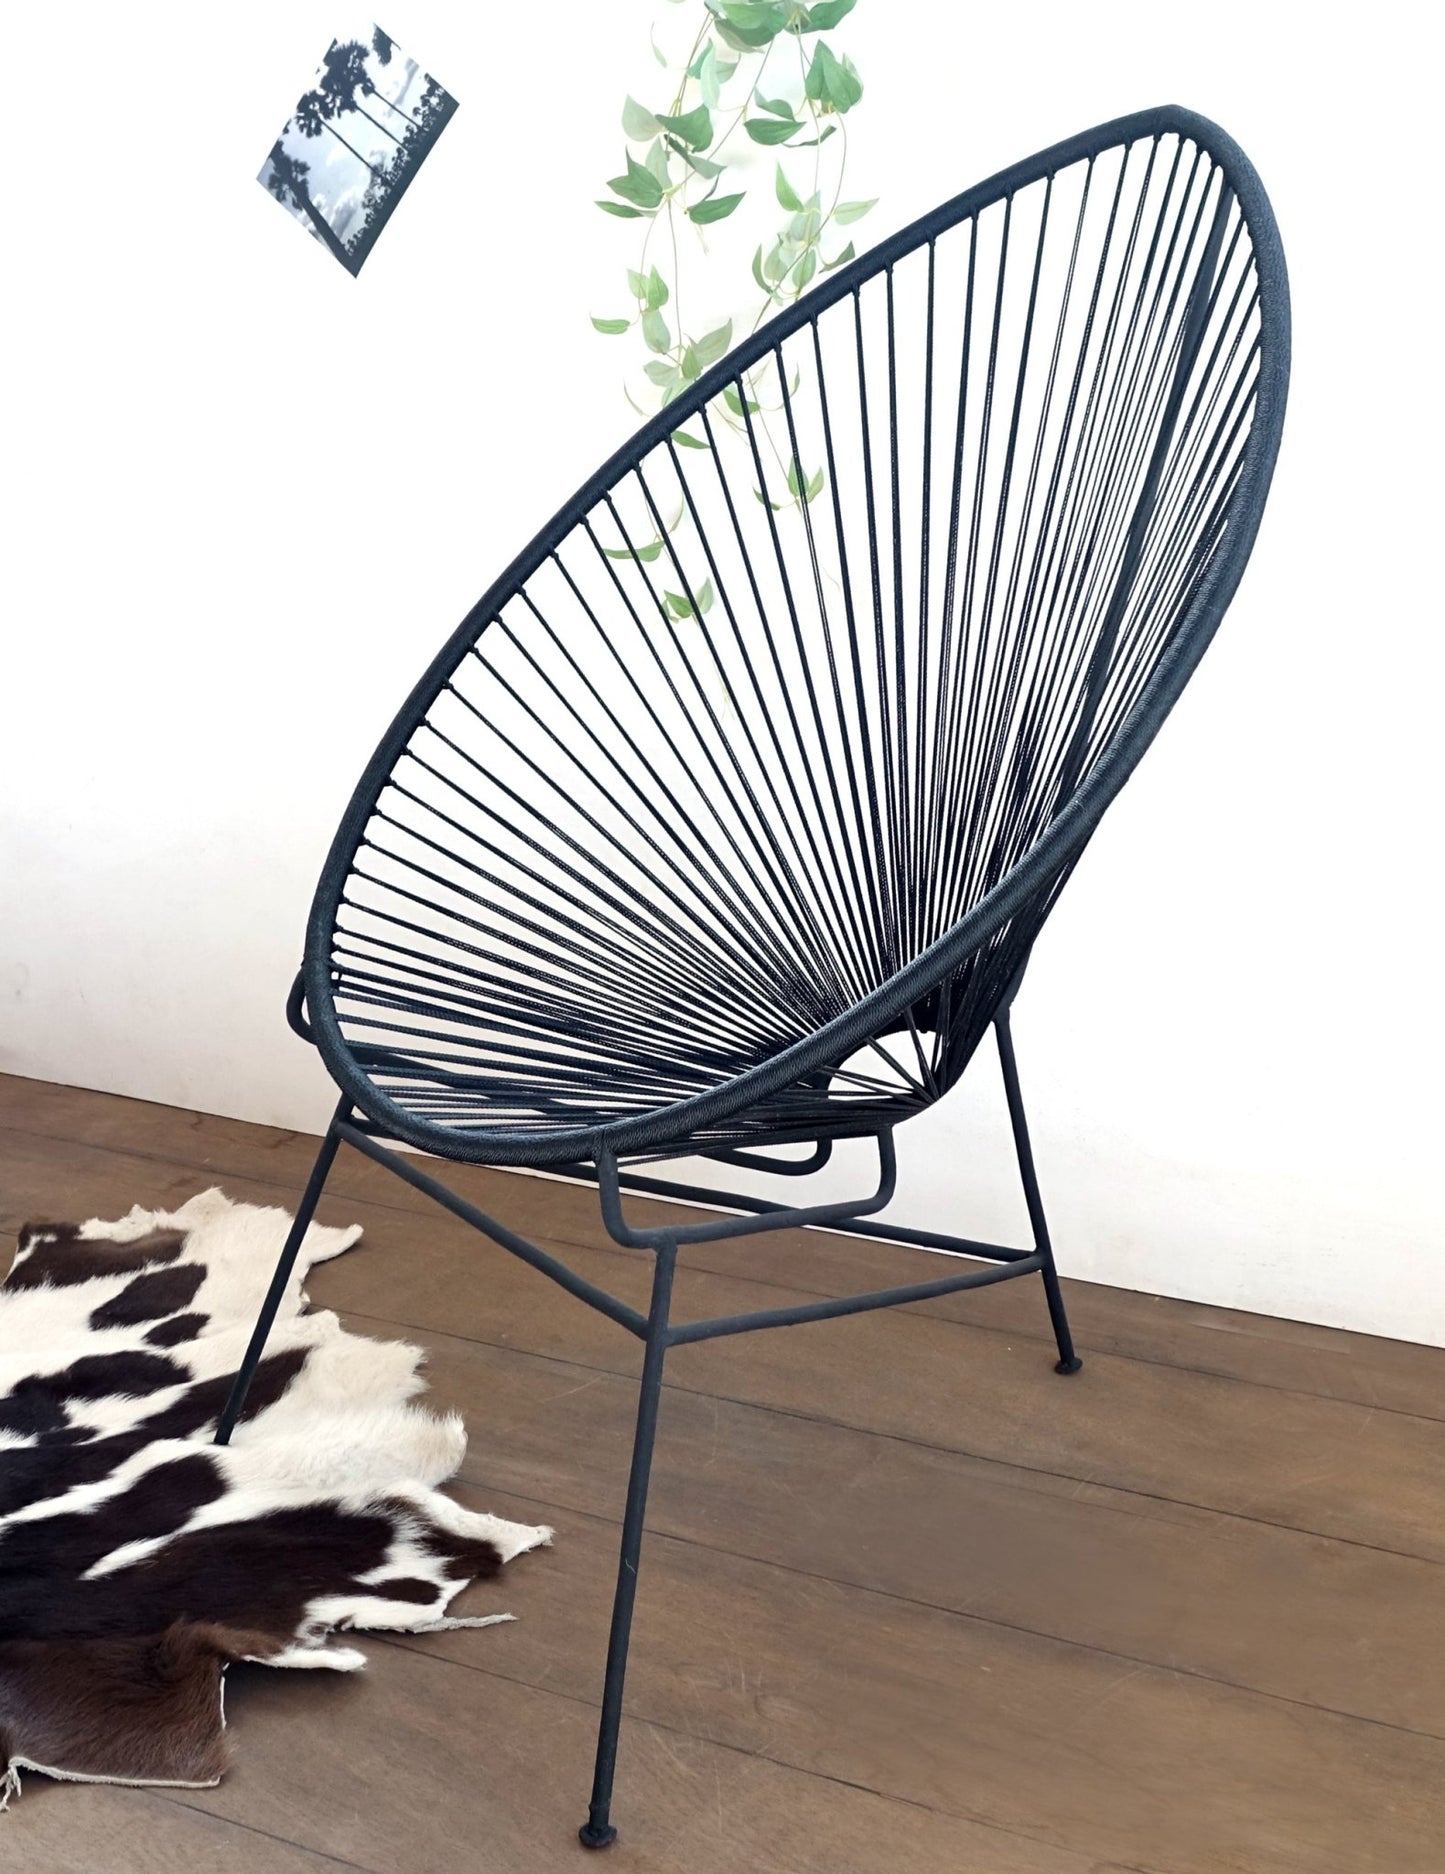 Metal & Threads Chair for Outdoor or Indoor / Acapulco Chair / Color Option - modecorarts